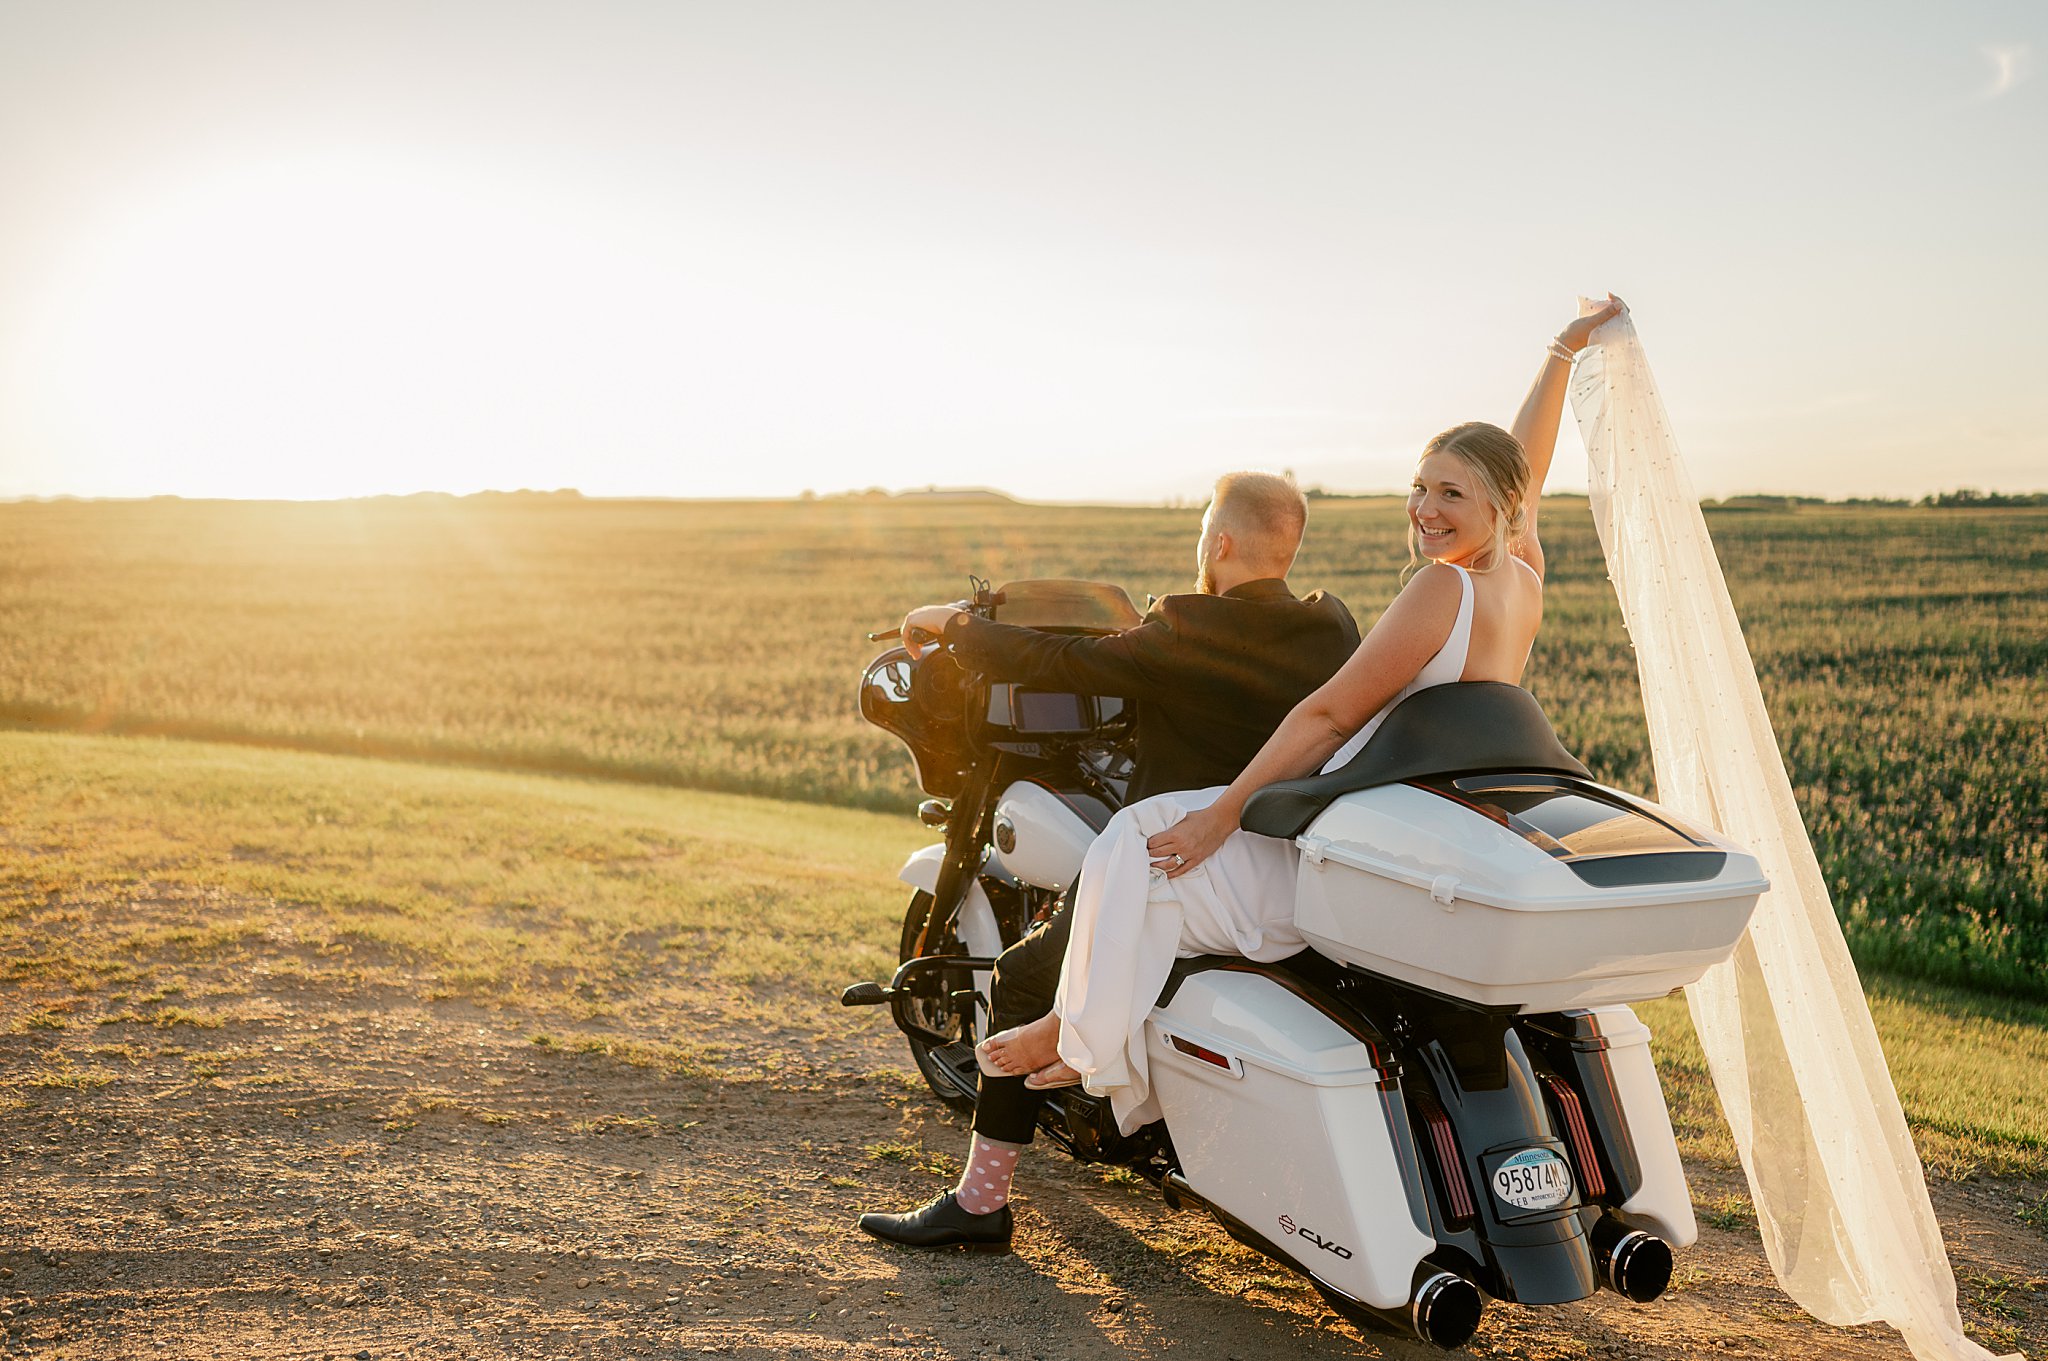 photog shares the 10 tools I couldn't live without as a wedding photographer as couple rides off into the sunset on motorcycle